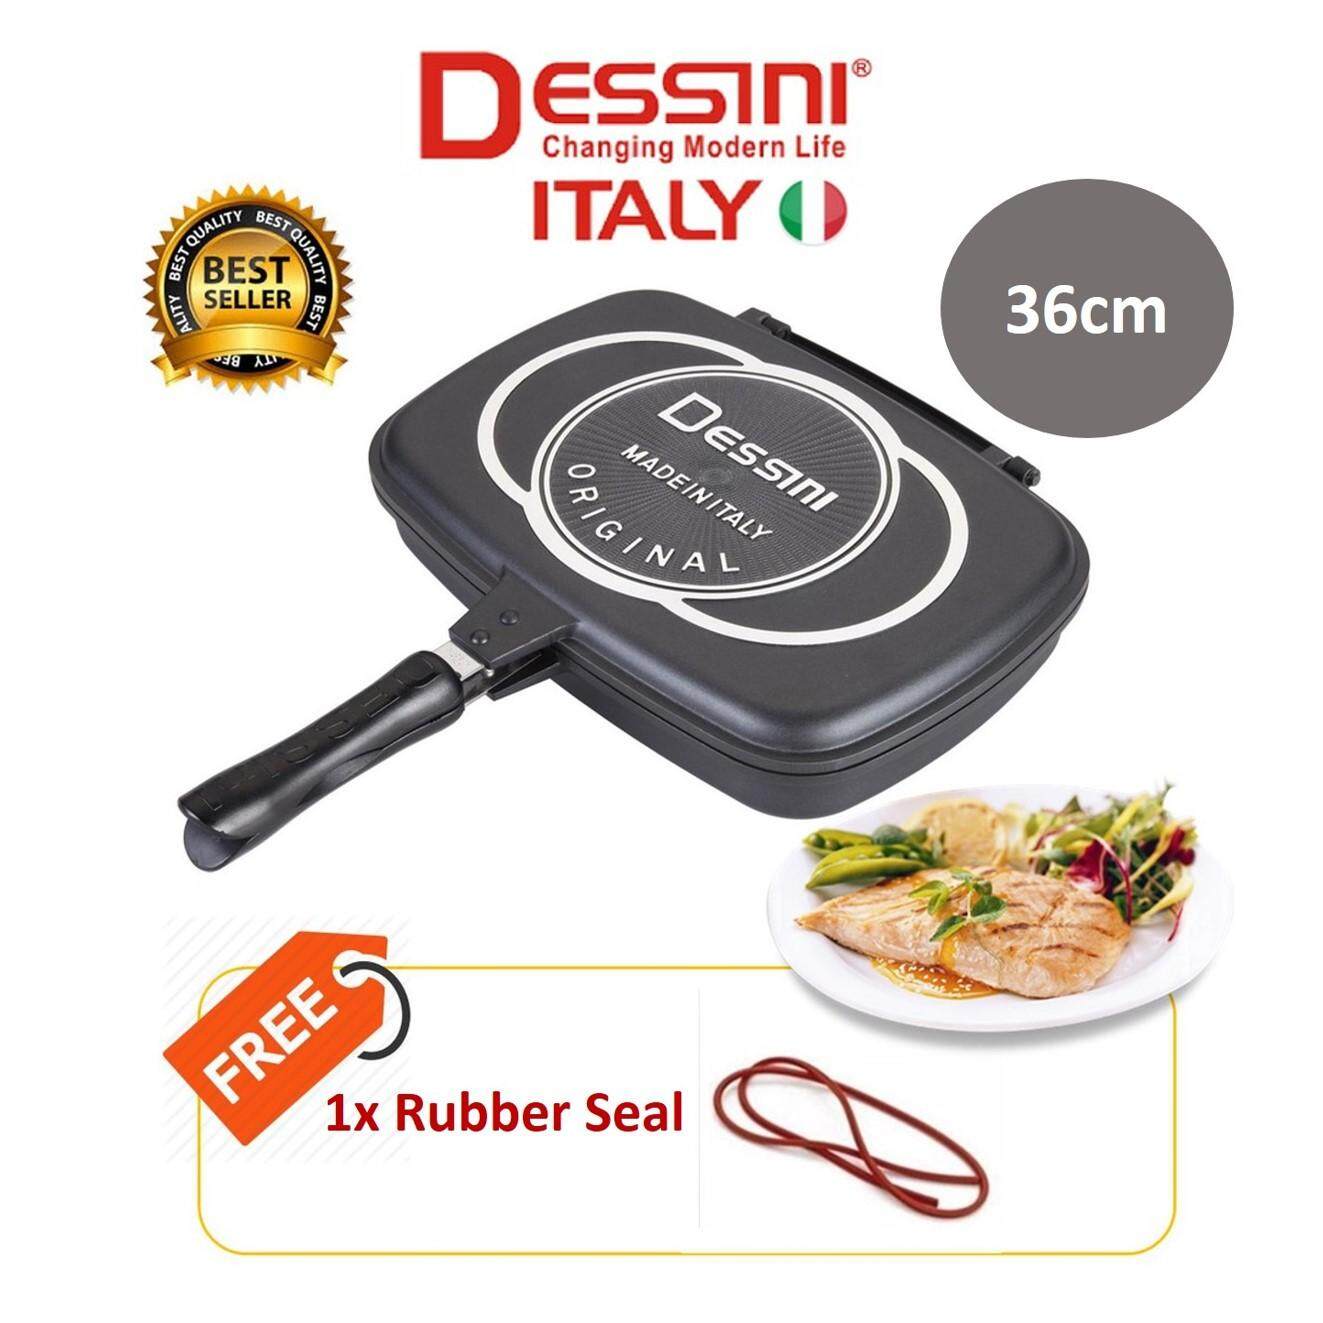 FENZO 36cm DESSINI High Scratch-Proof Die Casting Double Grill Pan